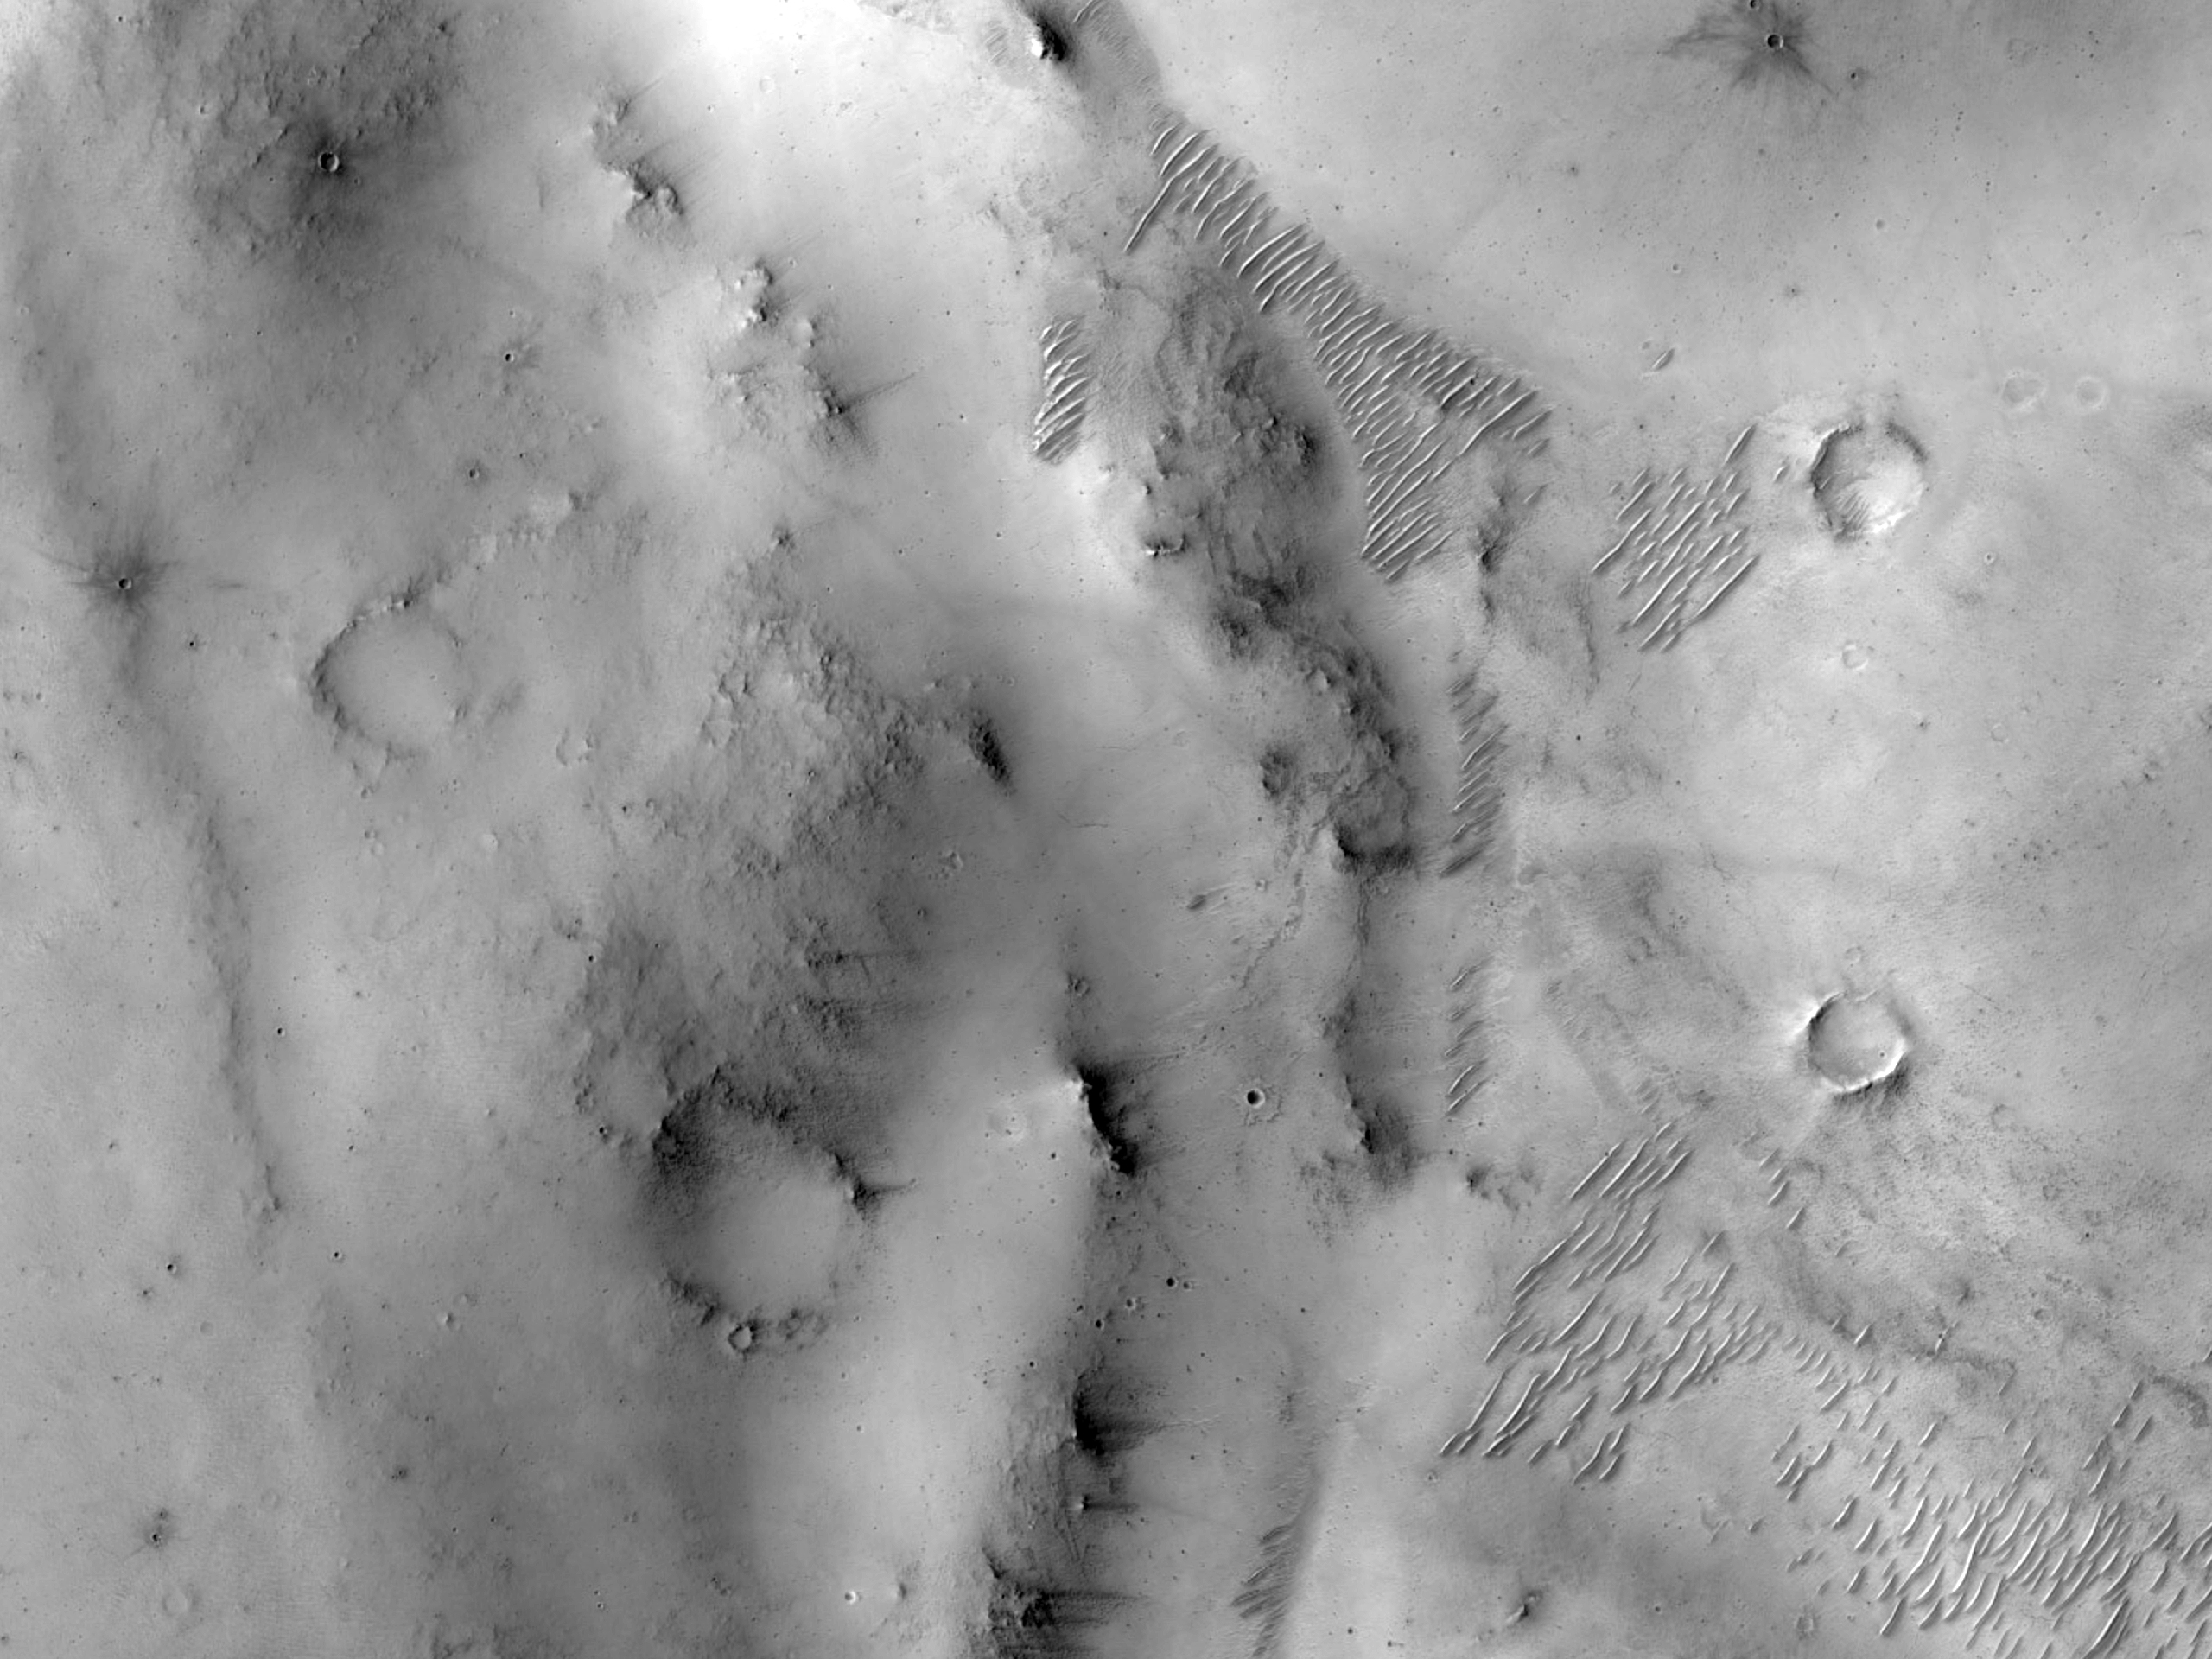 Channels in Tisia Valles